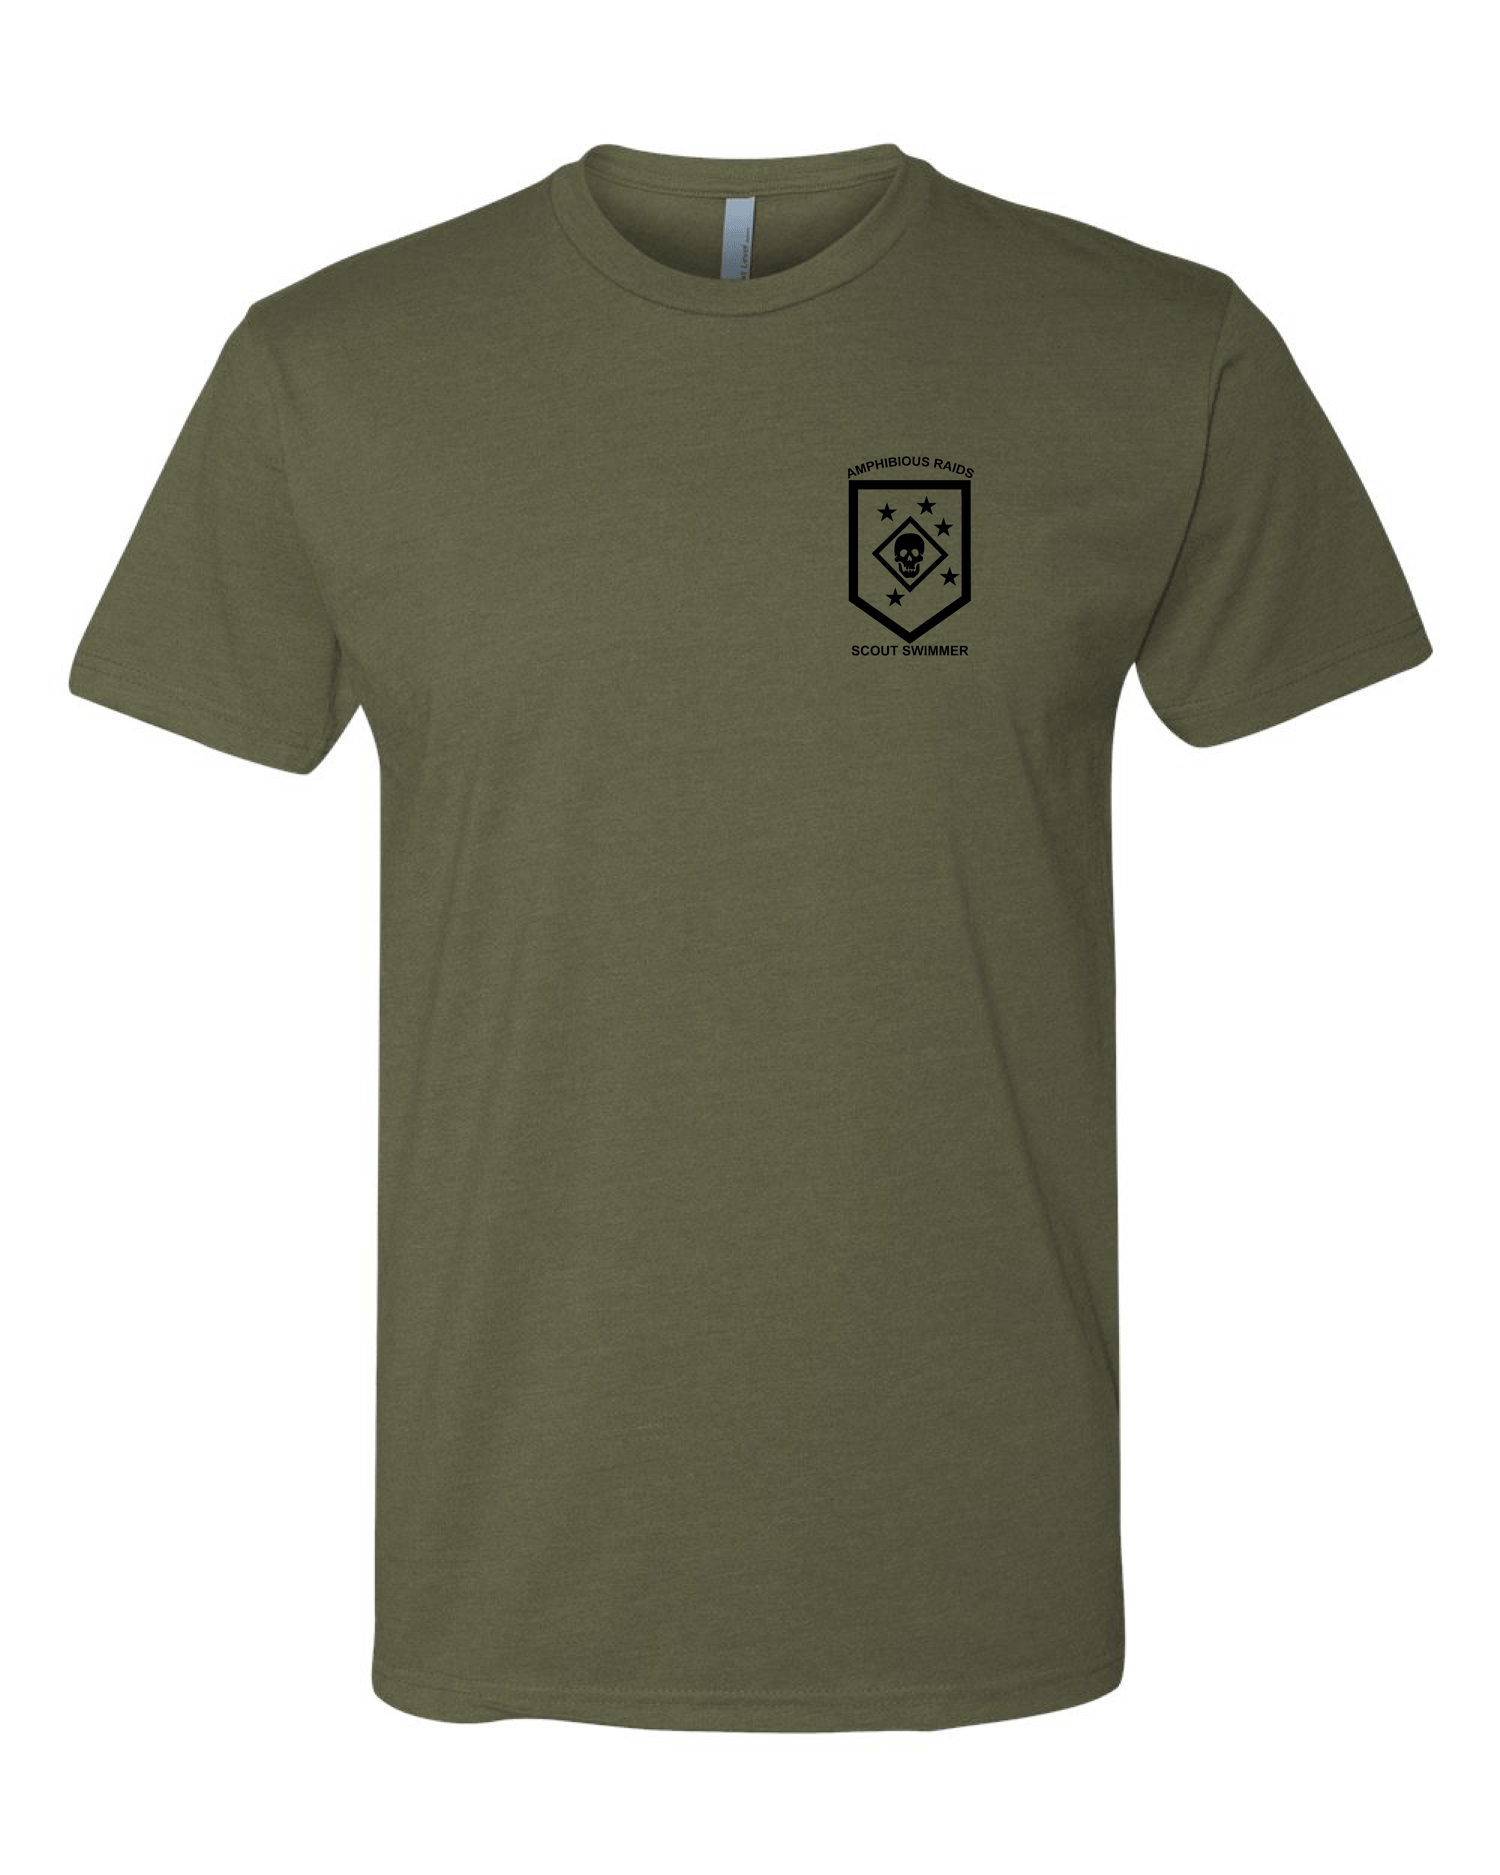 Scout Swimmer Tee | Paid To Raid